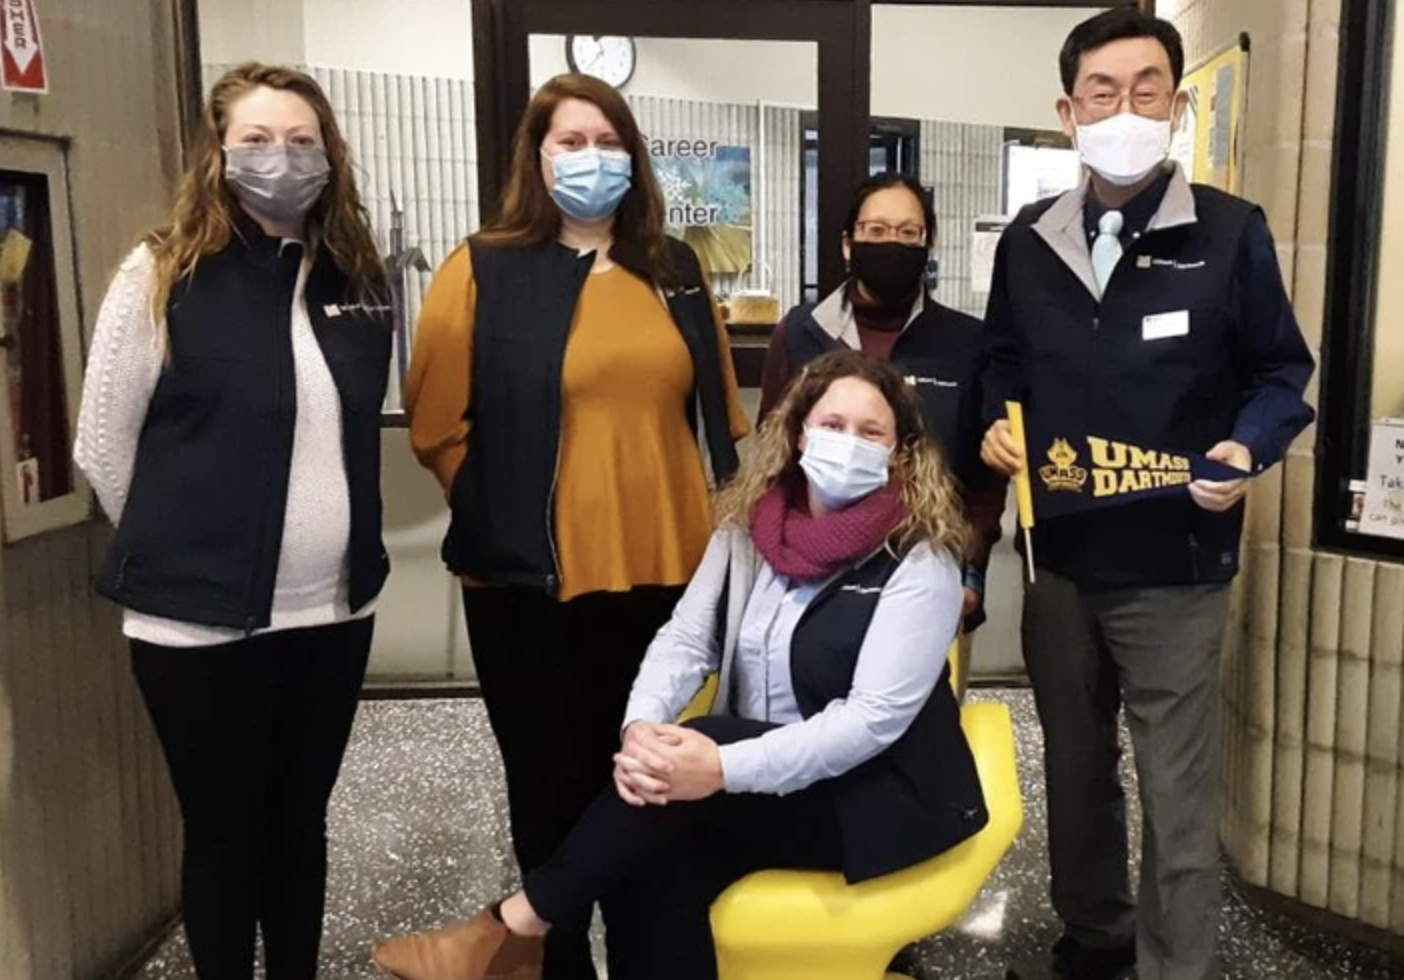 Five members of the UMass Dartmouth Career Center staff wear masks and smile at the camera